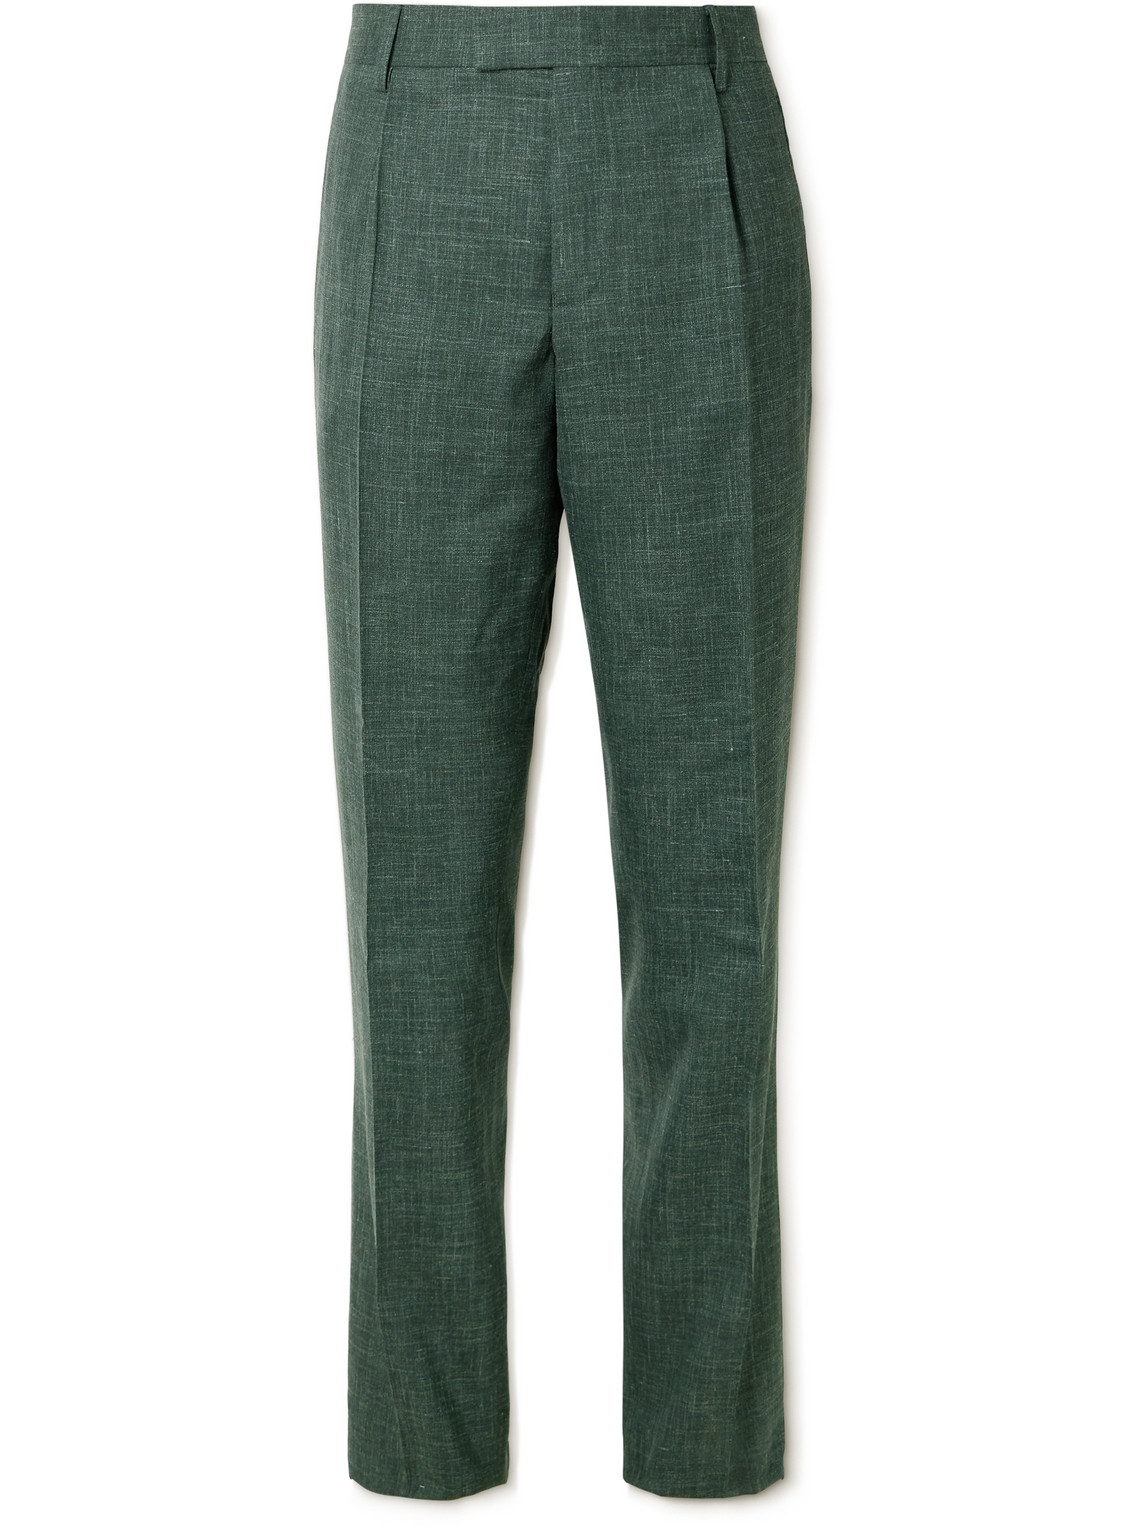 Mr P. - Mike Straight-Leg Pleated Wool, Silk and Linen-Blend Suit Trousers - Men - Green - 34 von Mr P.